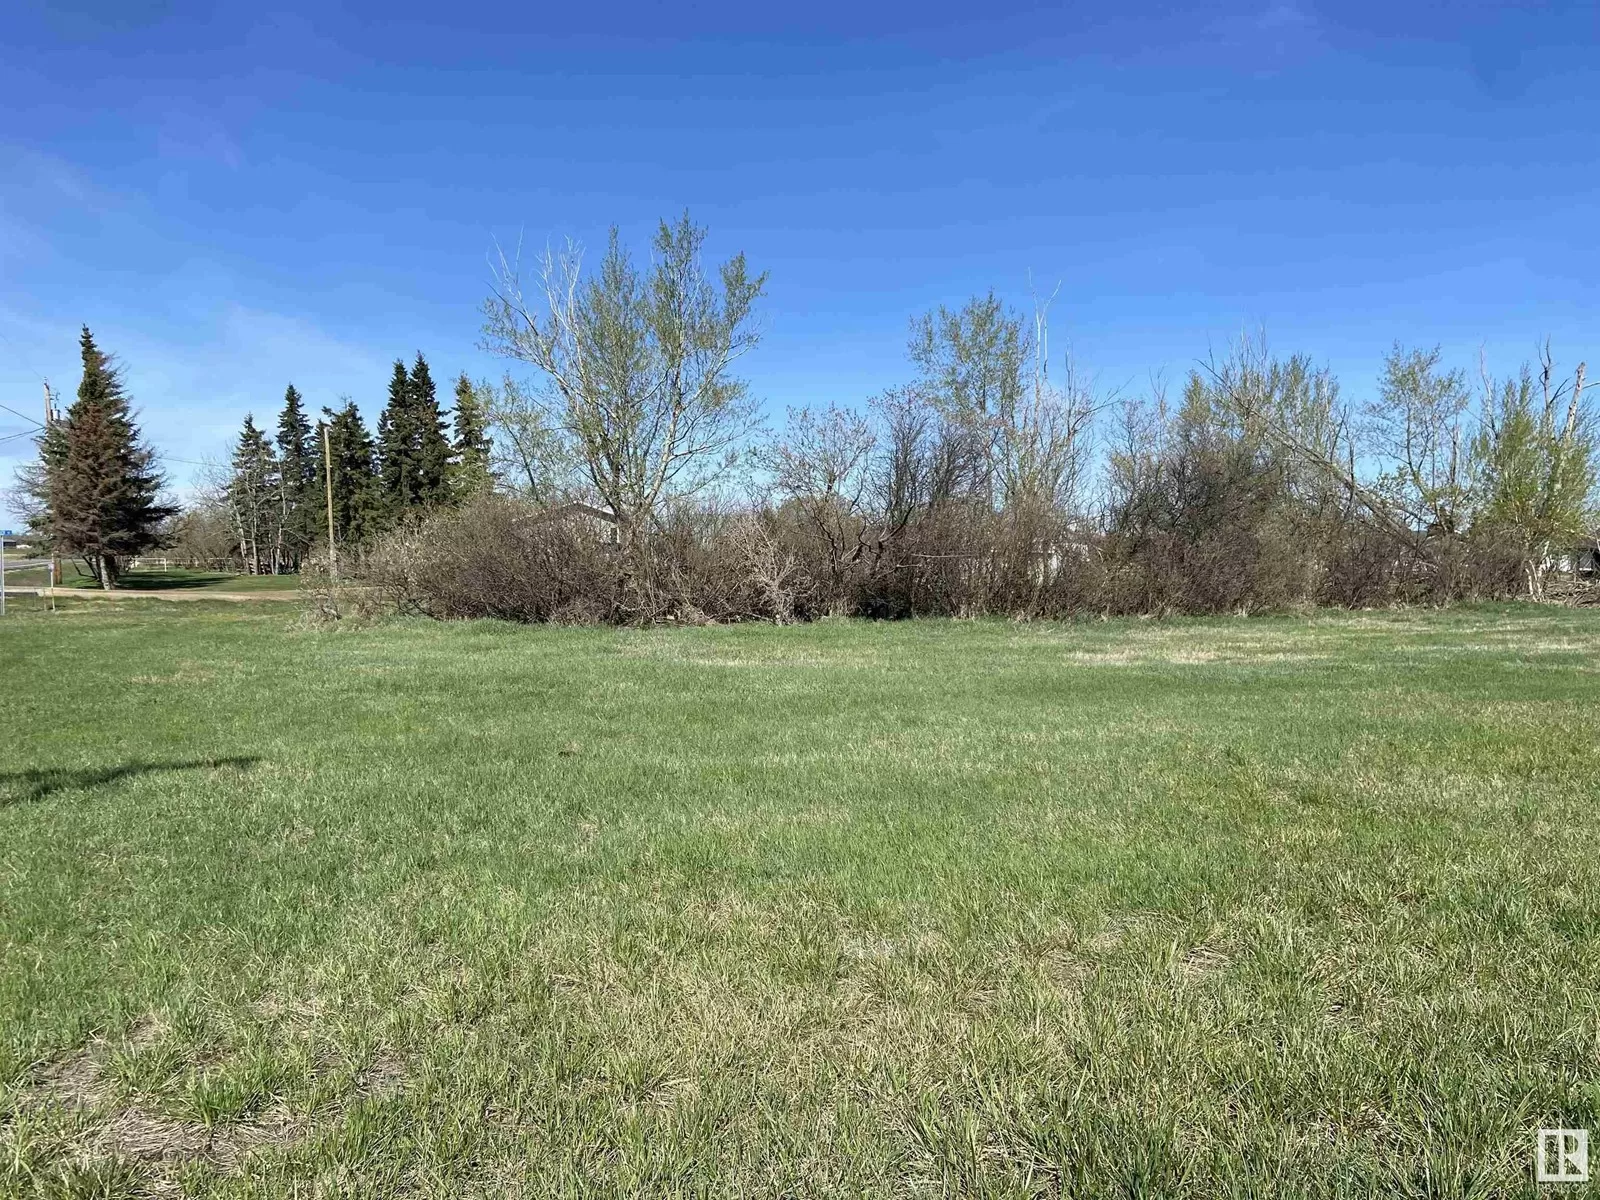 No Building for rent: #236 26500 Hwy 44, Riviere Qui Barre, Alberta T8R 0J3